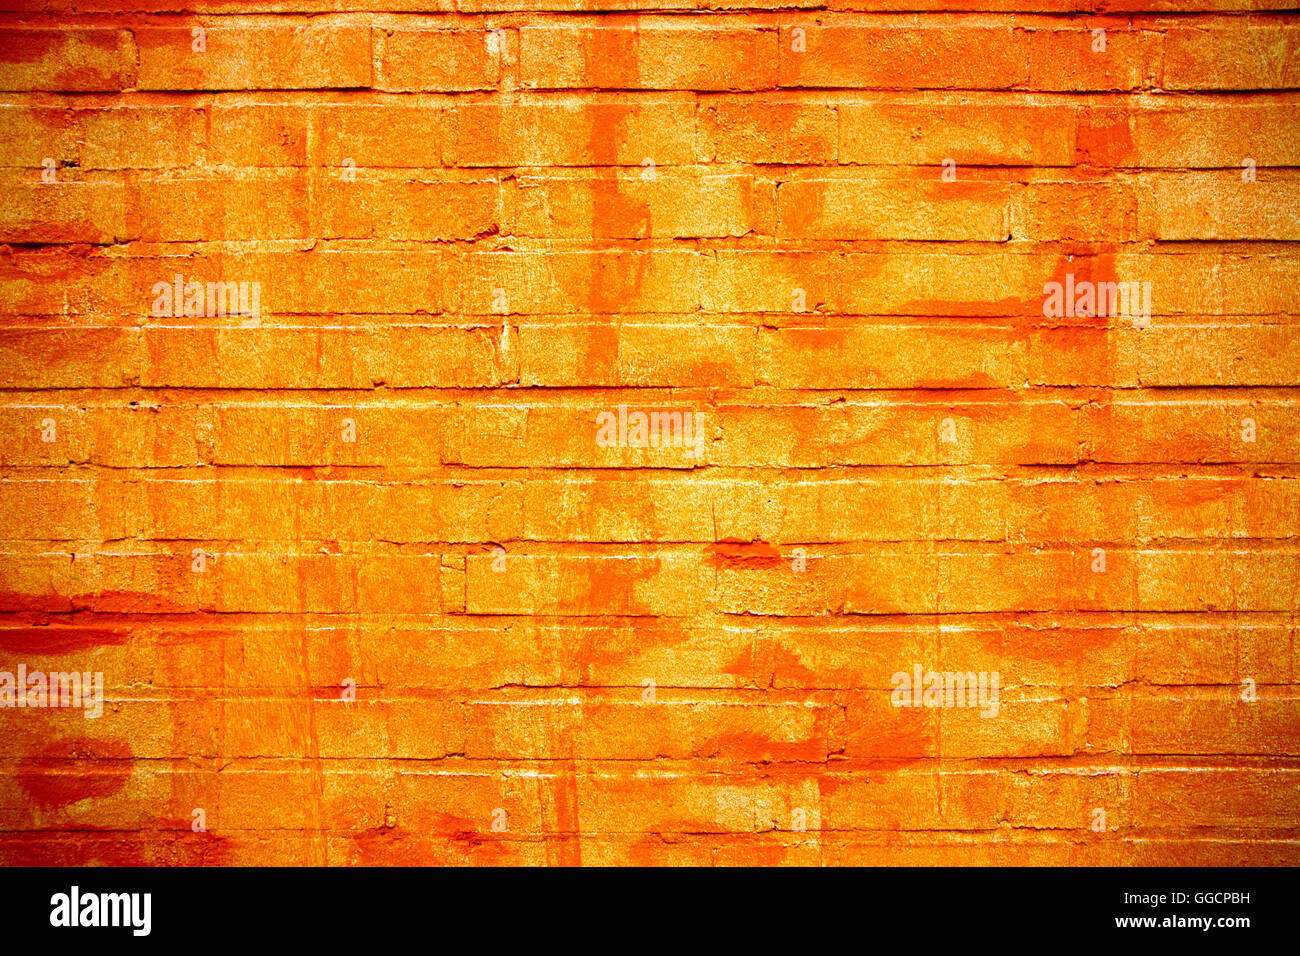 brick wall in orange colors as a background Stock Photo